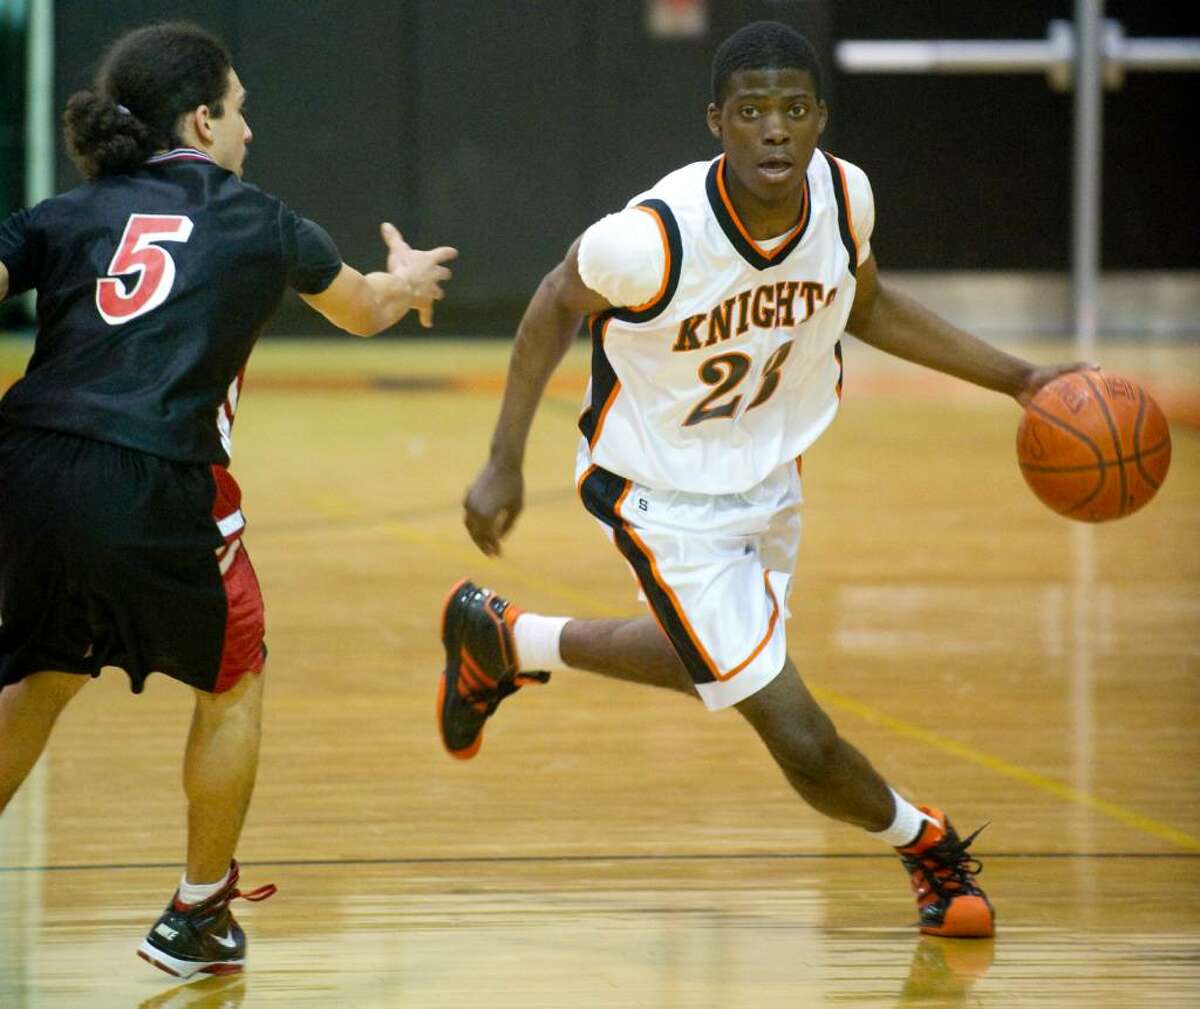 Stamford's Jethro Anilus, right, drives past Central's Chris Colon, left, during an FCIAC boys basketball game at Stamford High School in Stamford, Conn. on Wednesday, Feb. 17, 2010.